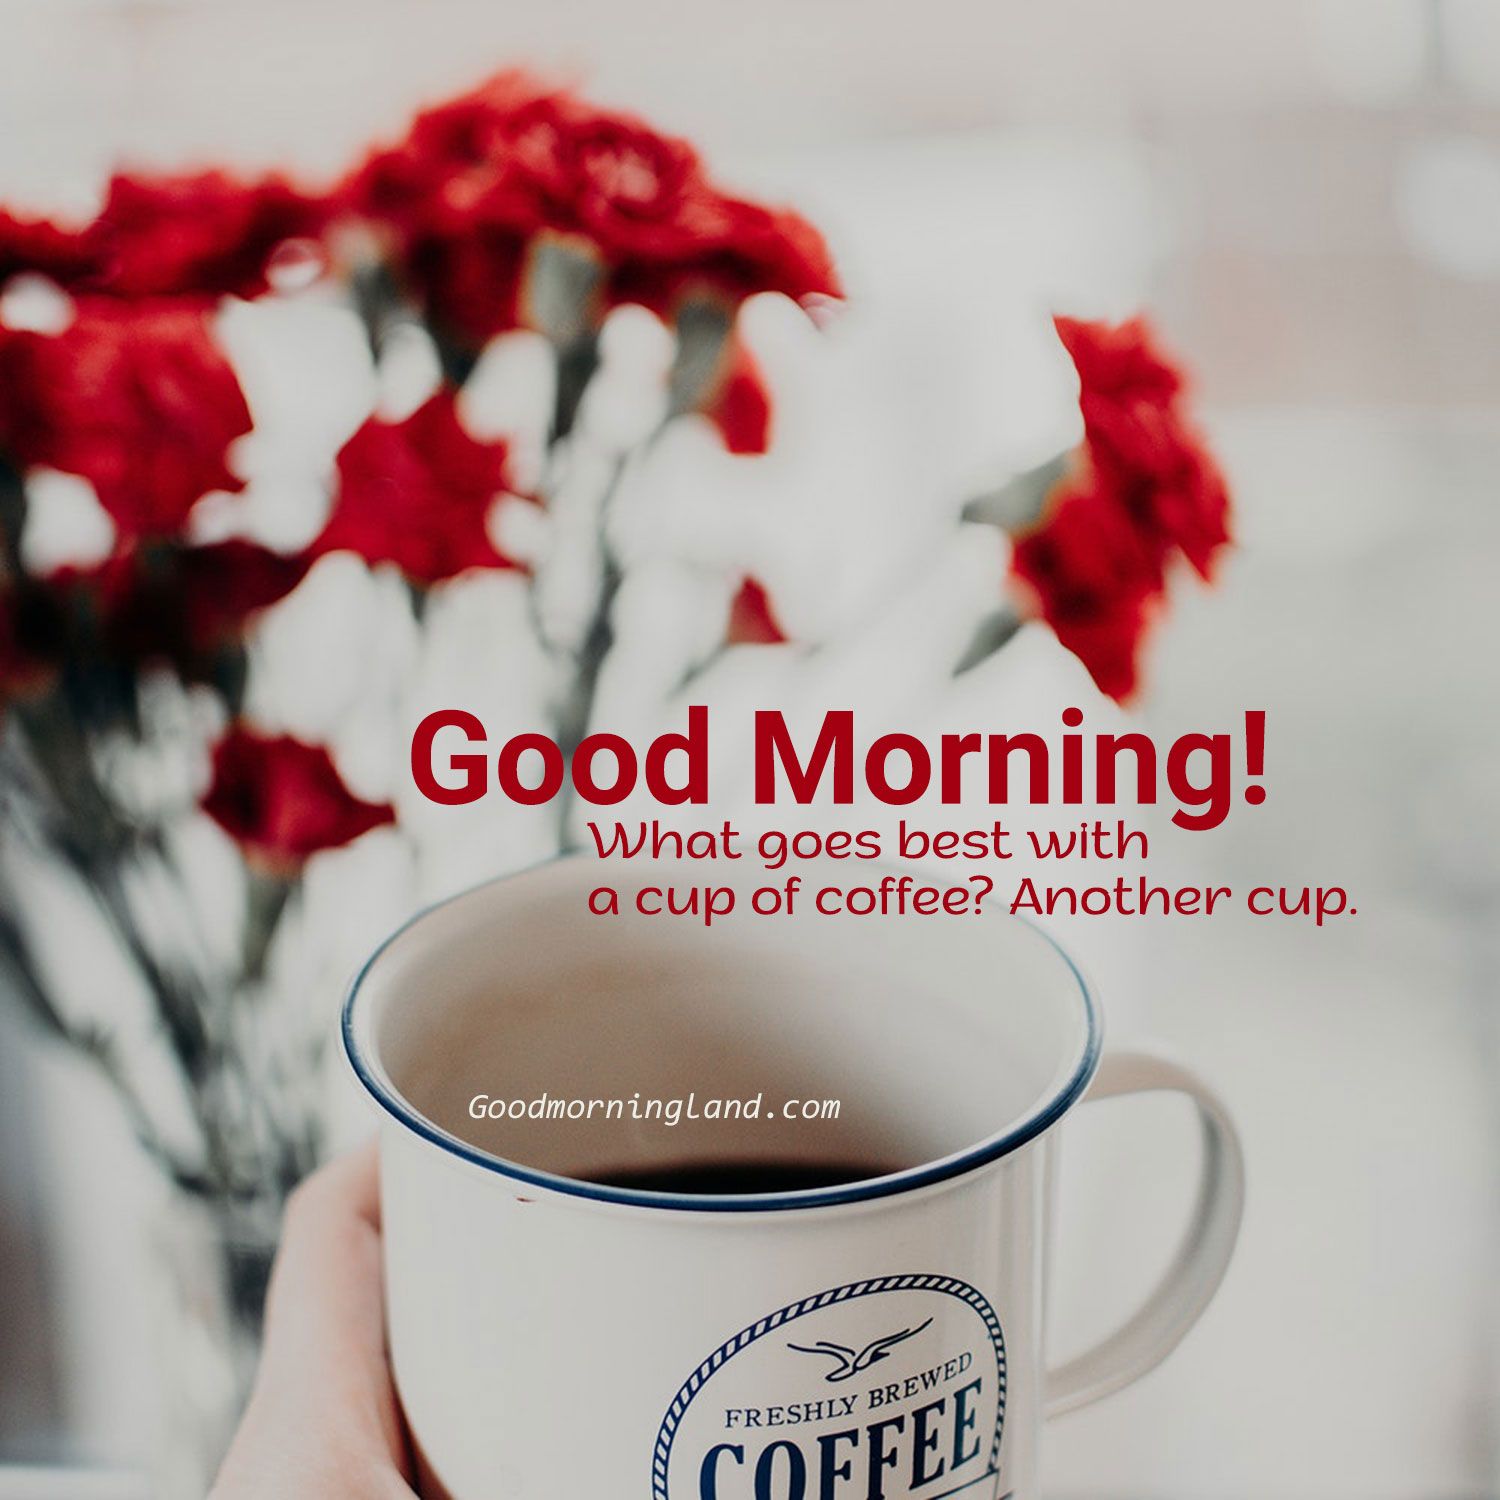 Send your Girlfriend beautiful good morning coffee image Morning Image, Quotes, Wishes, Messages, greetings & eCards